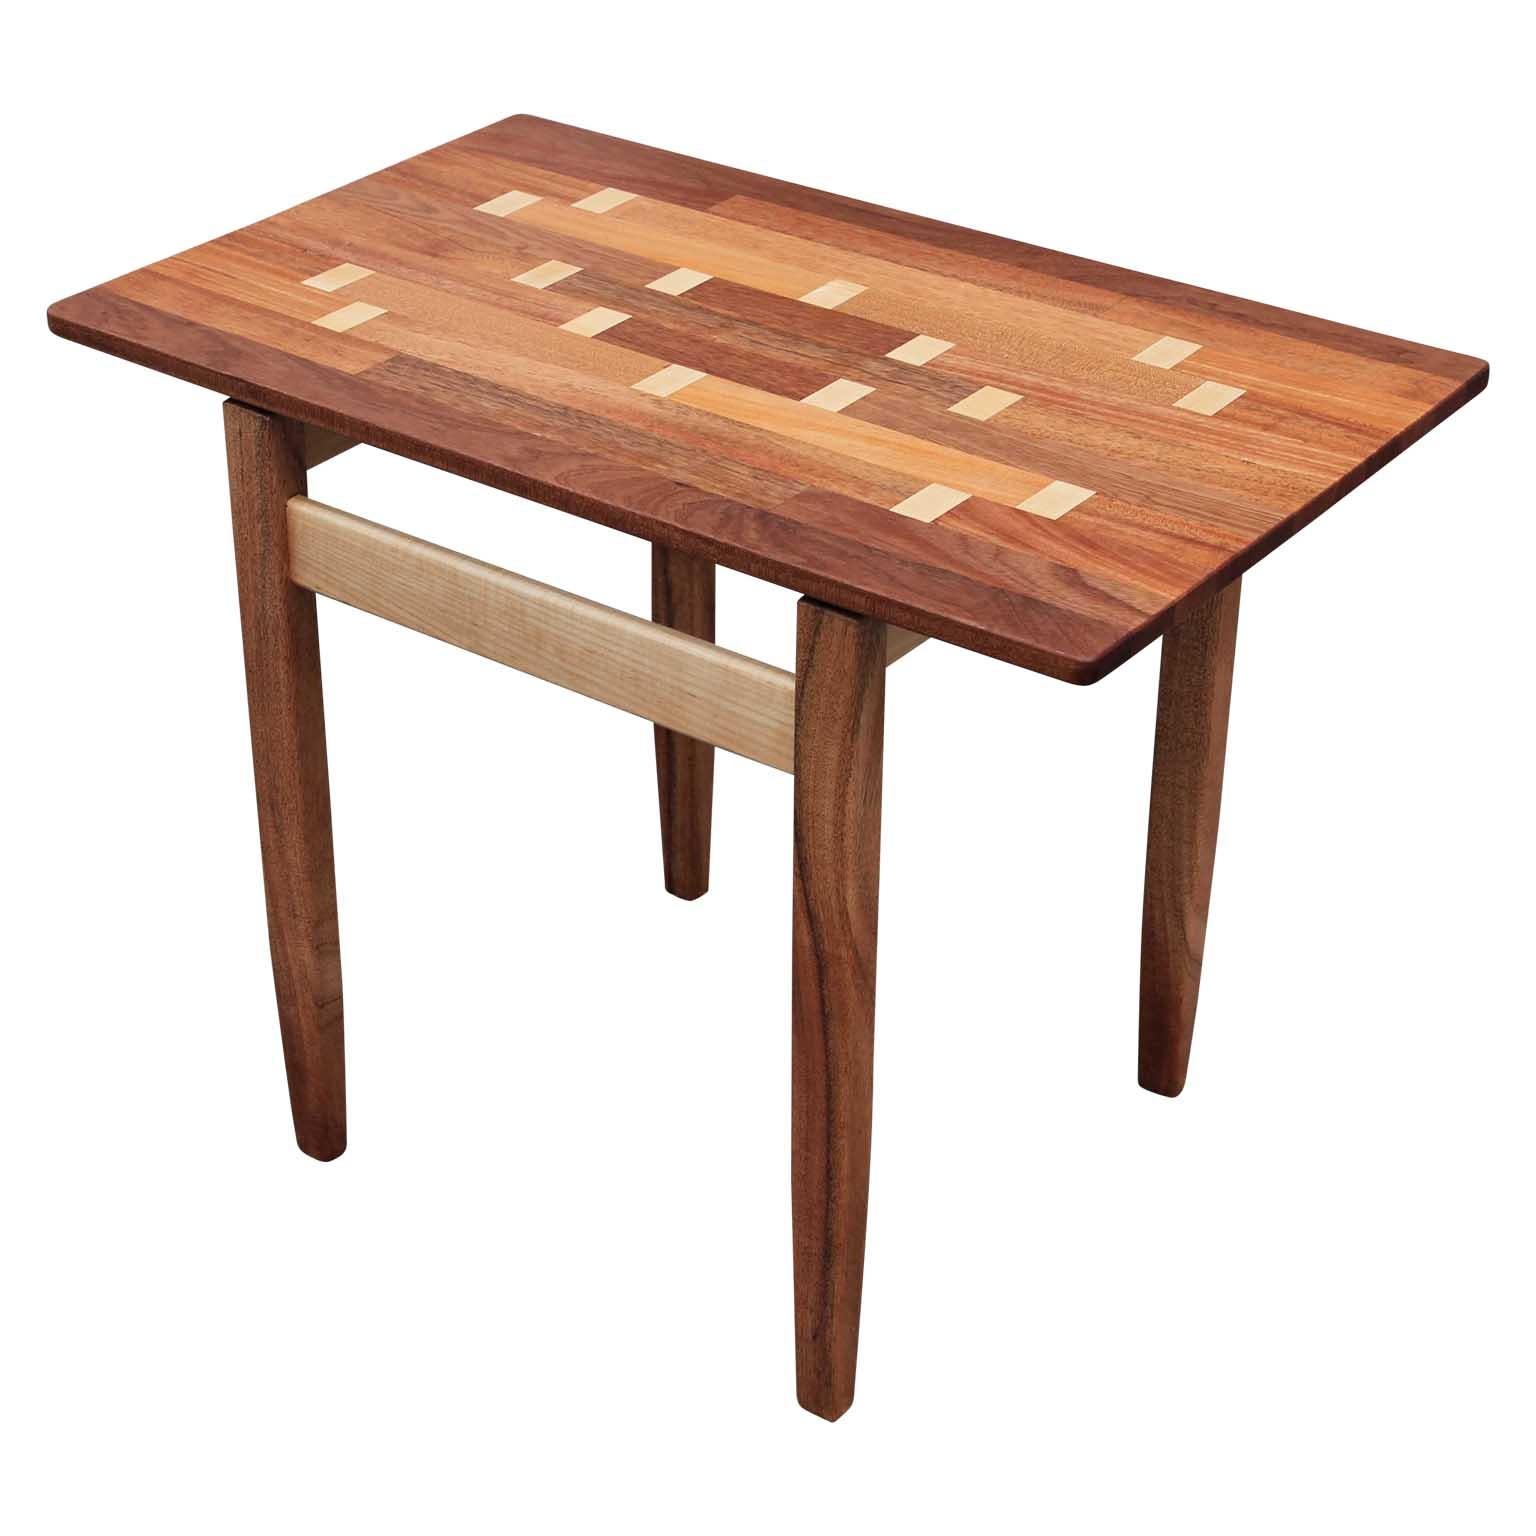 Custom studio made Norm Stoeker African mahogany and maple wood inlaid rectangular side table.
Norm Stoeker is a Houston, Texas furniture maker who works with oak, walnut, and poplar. This lovely table is custom made and one of a kind. Beautiful